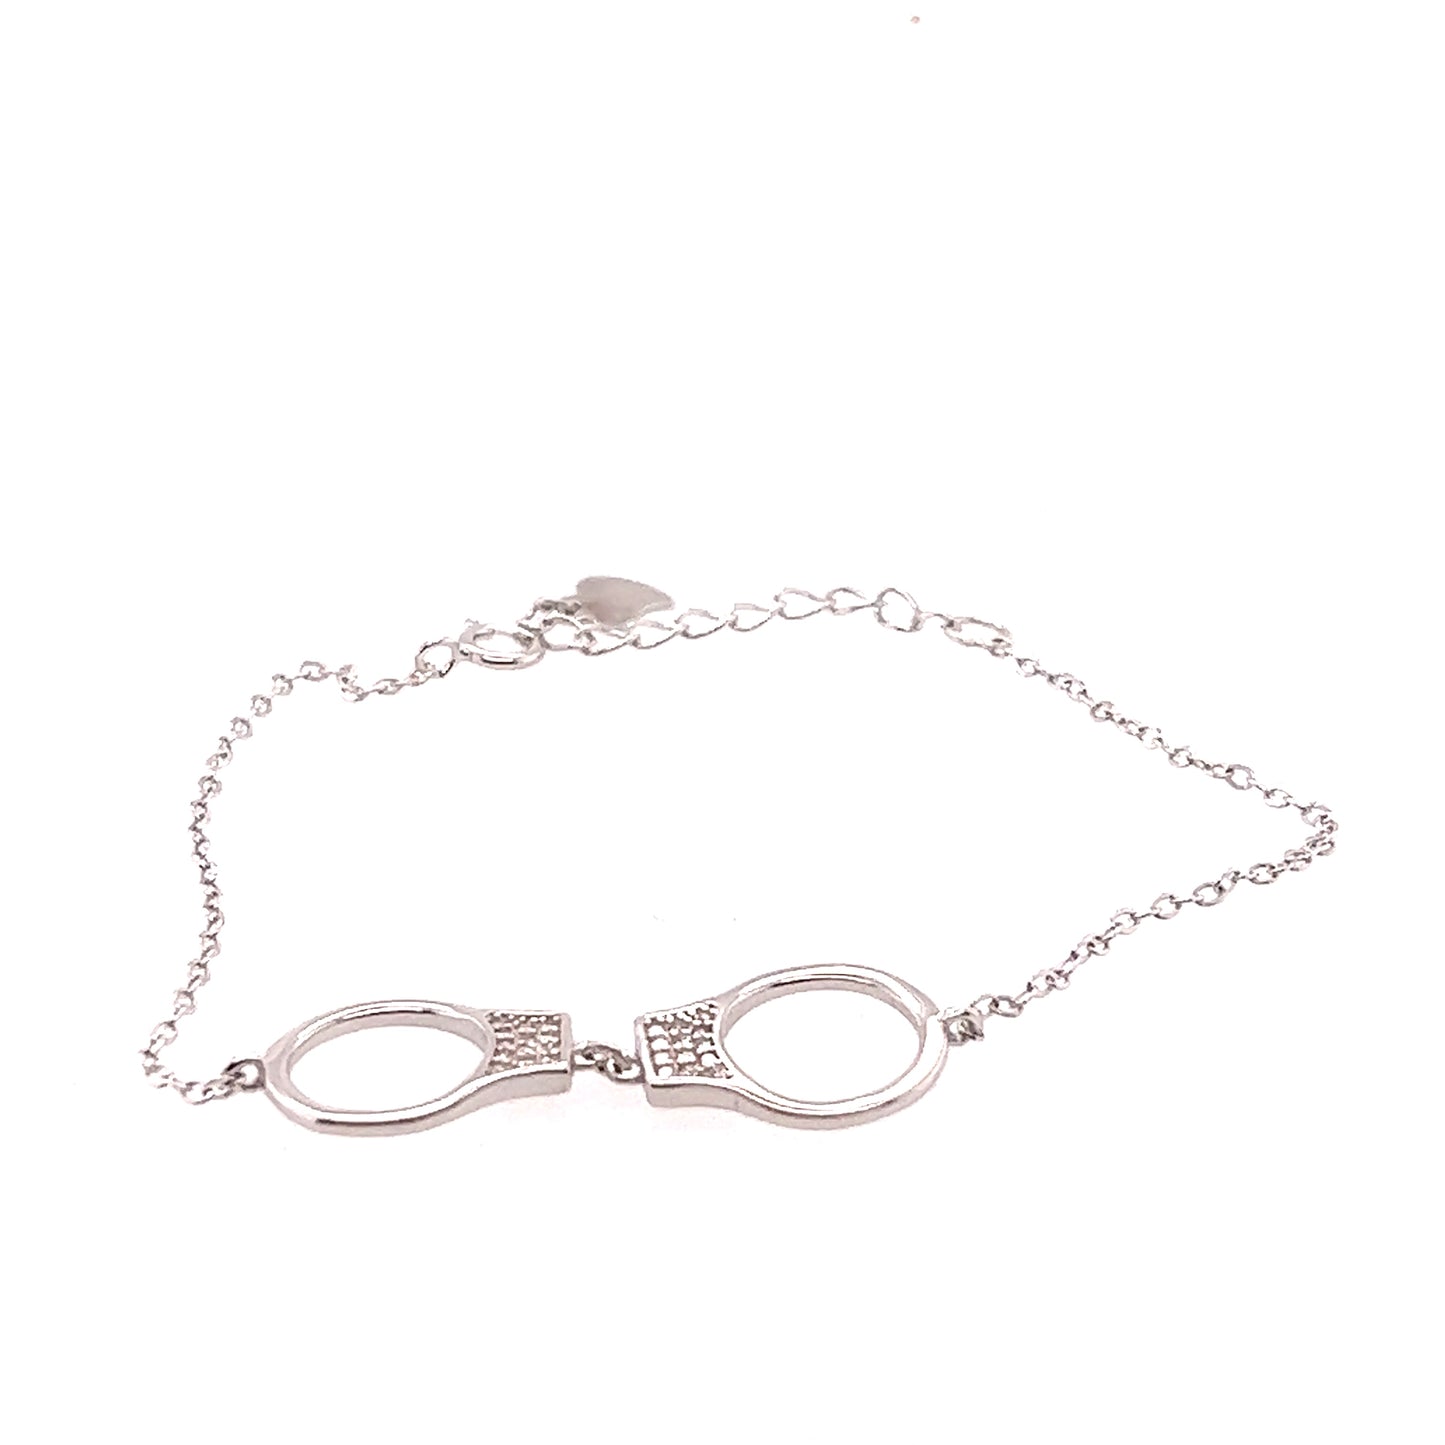 A delicate Super Silver Cubic Zirconia Handcuff Bracelet, perfect for minimalist style outfits, set against a clean white background.